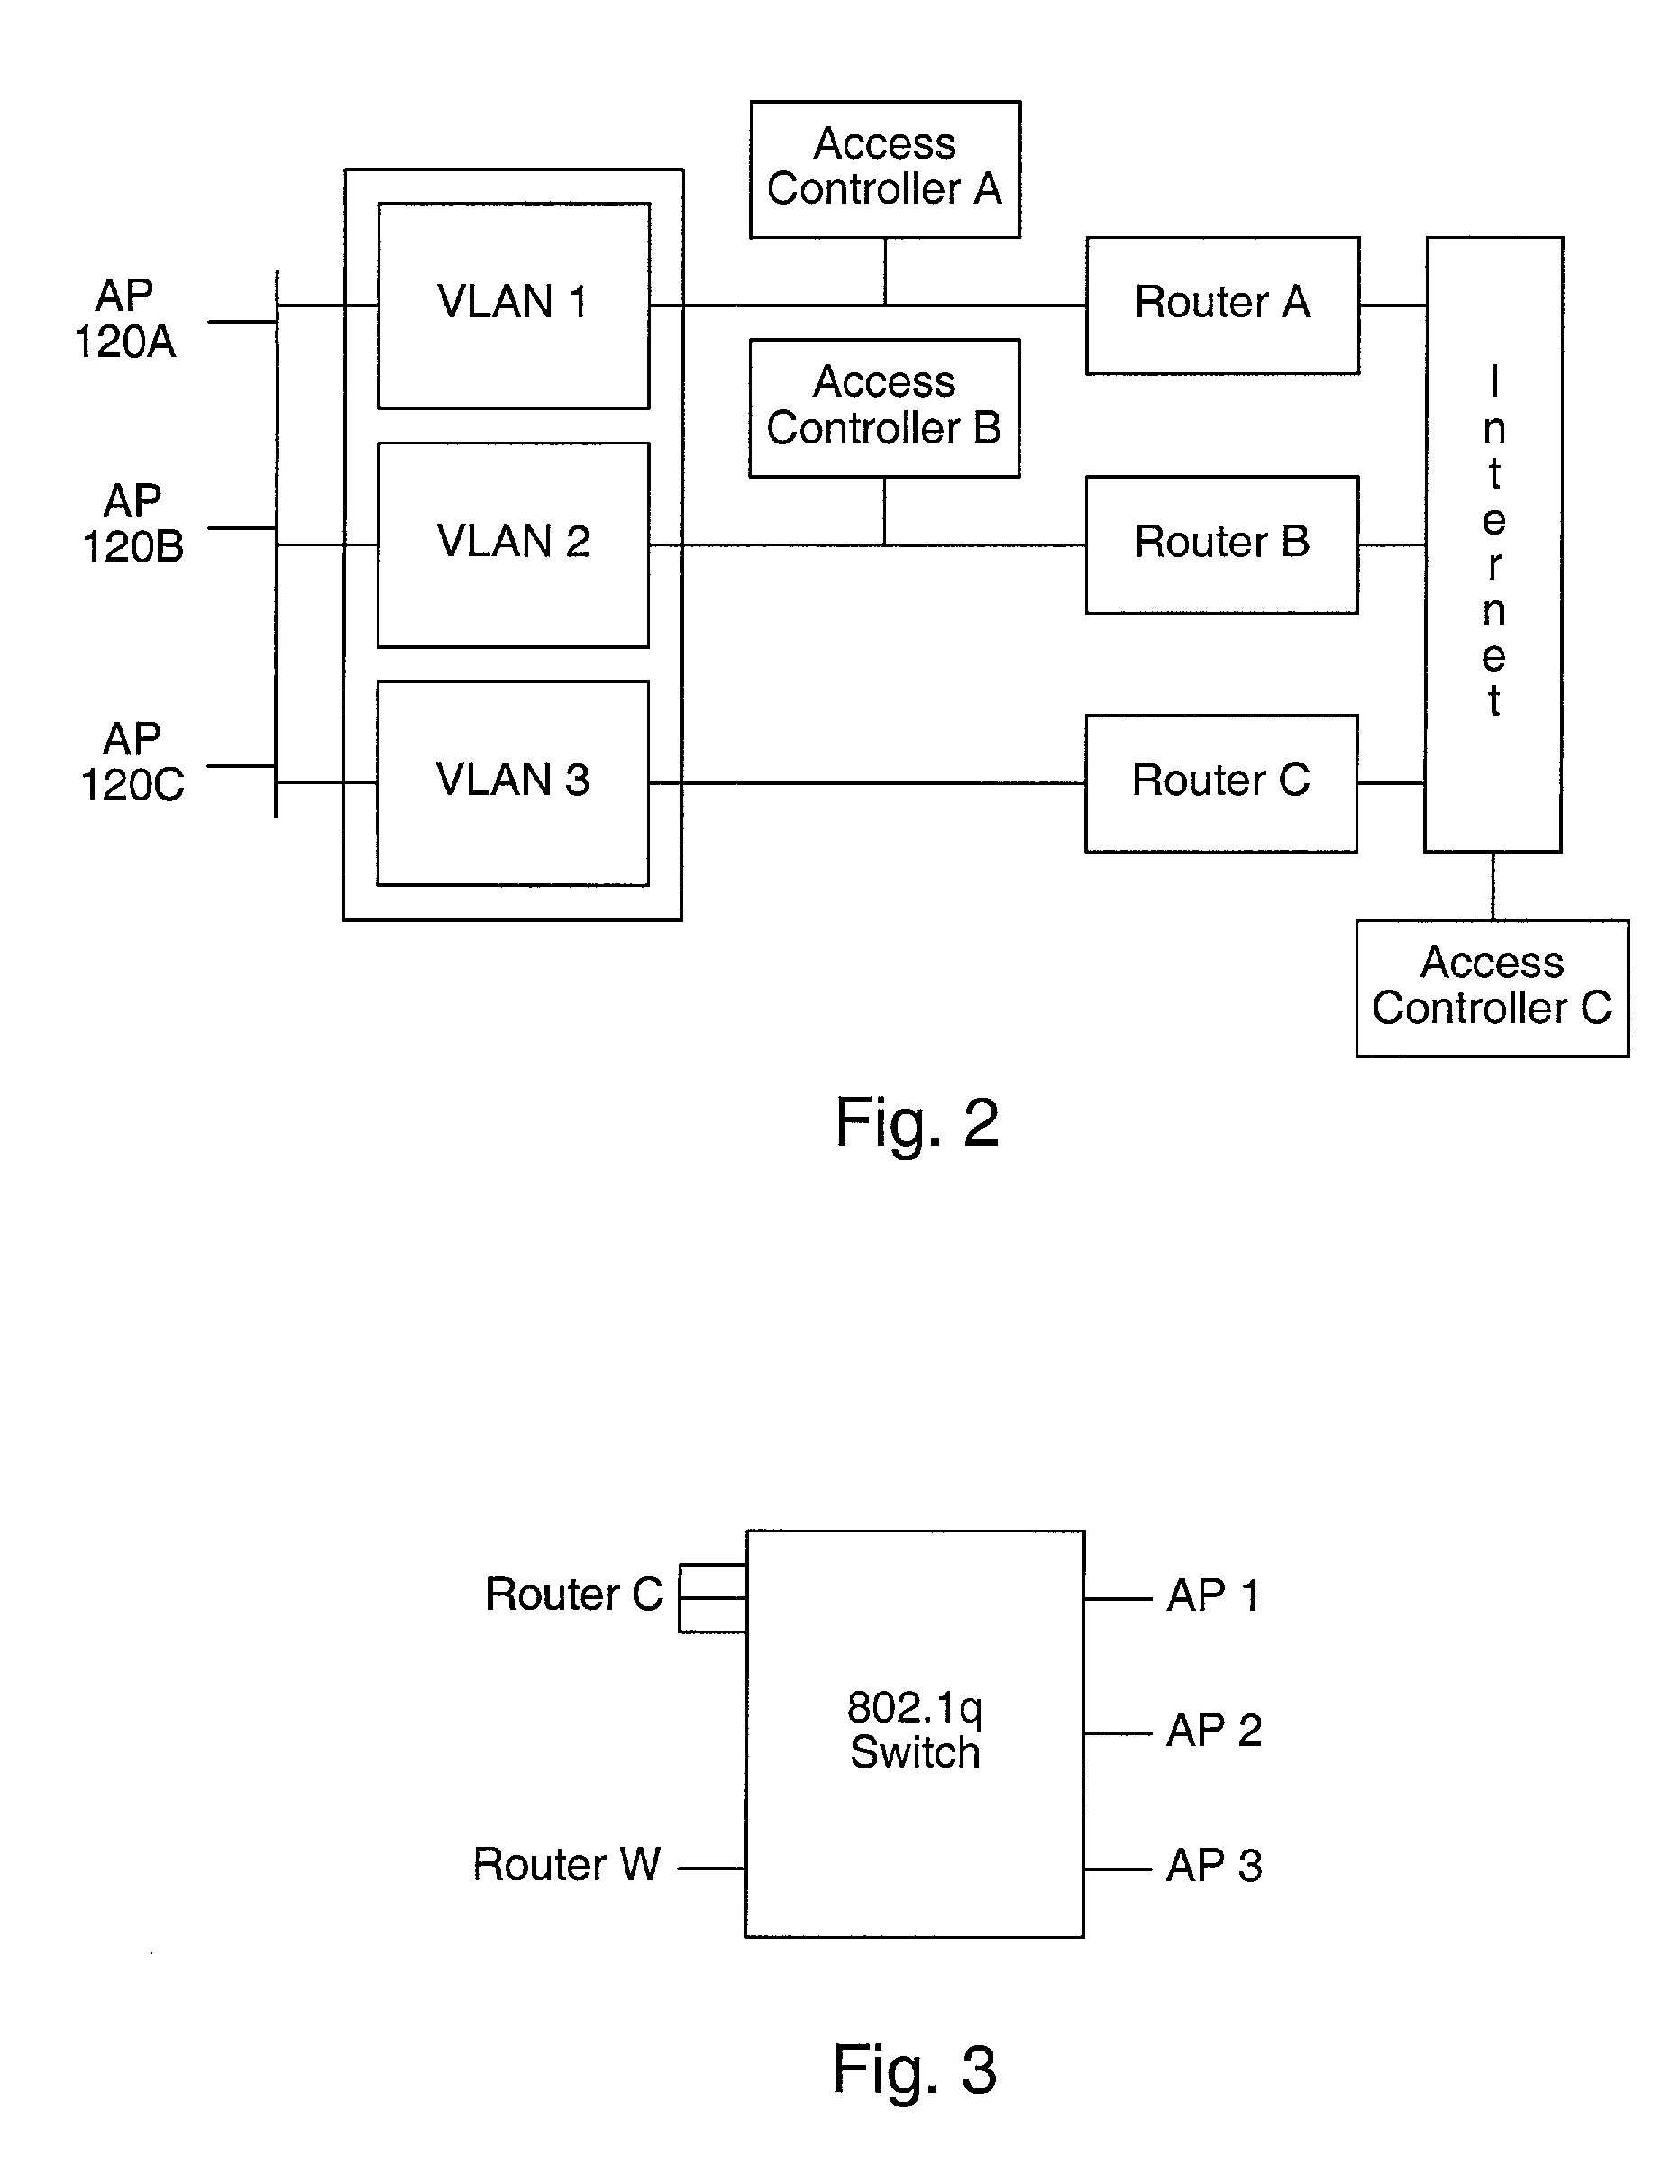 Distributed network communication system which allows multiple wireless service providers to share a common network infrastructure